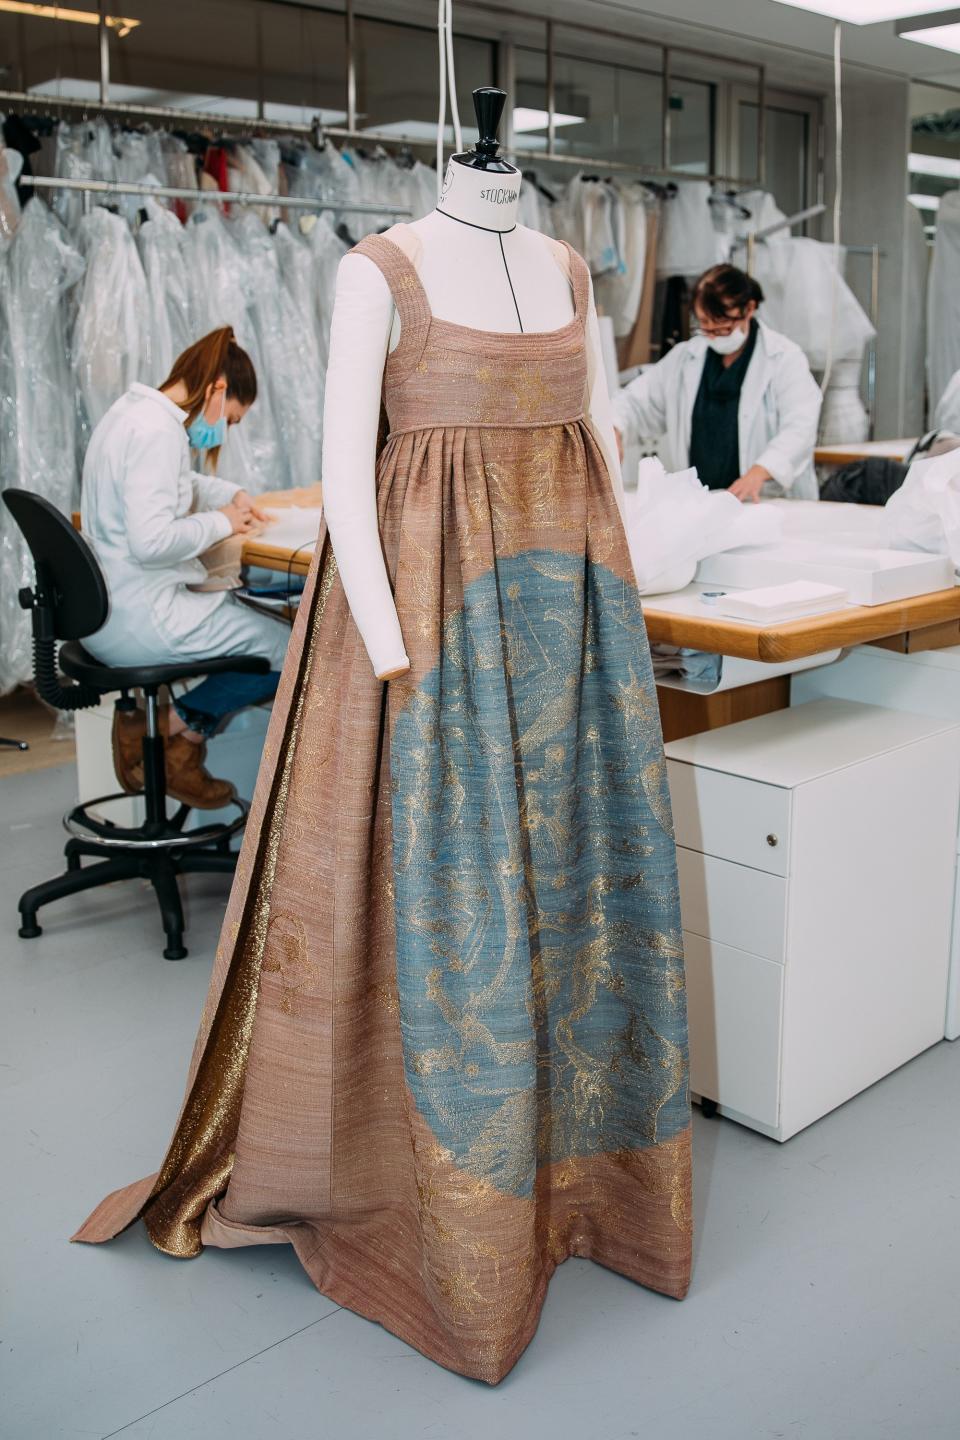 Another View of the Spring 2021 Haute Couture Collections